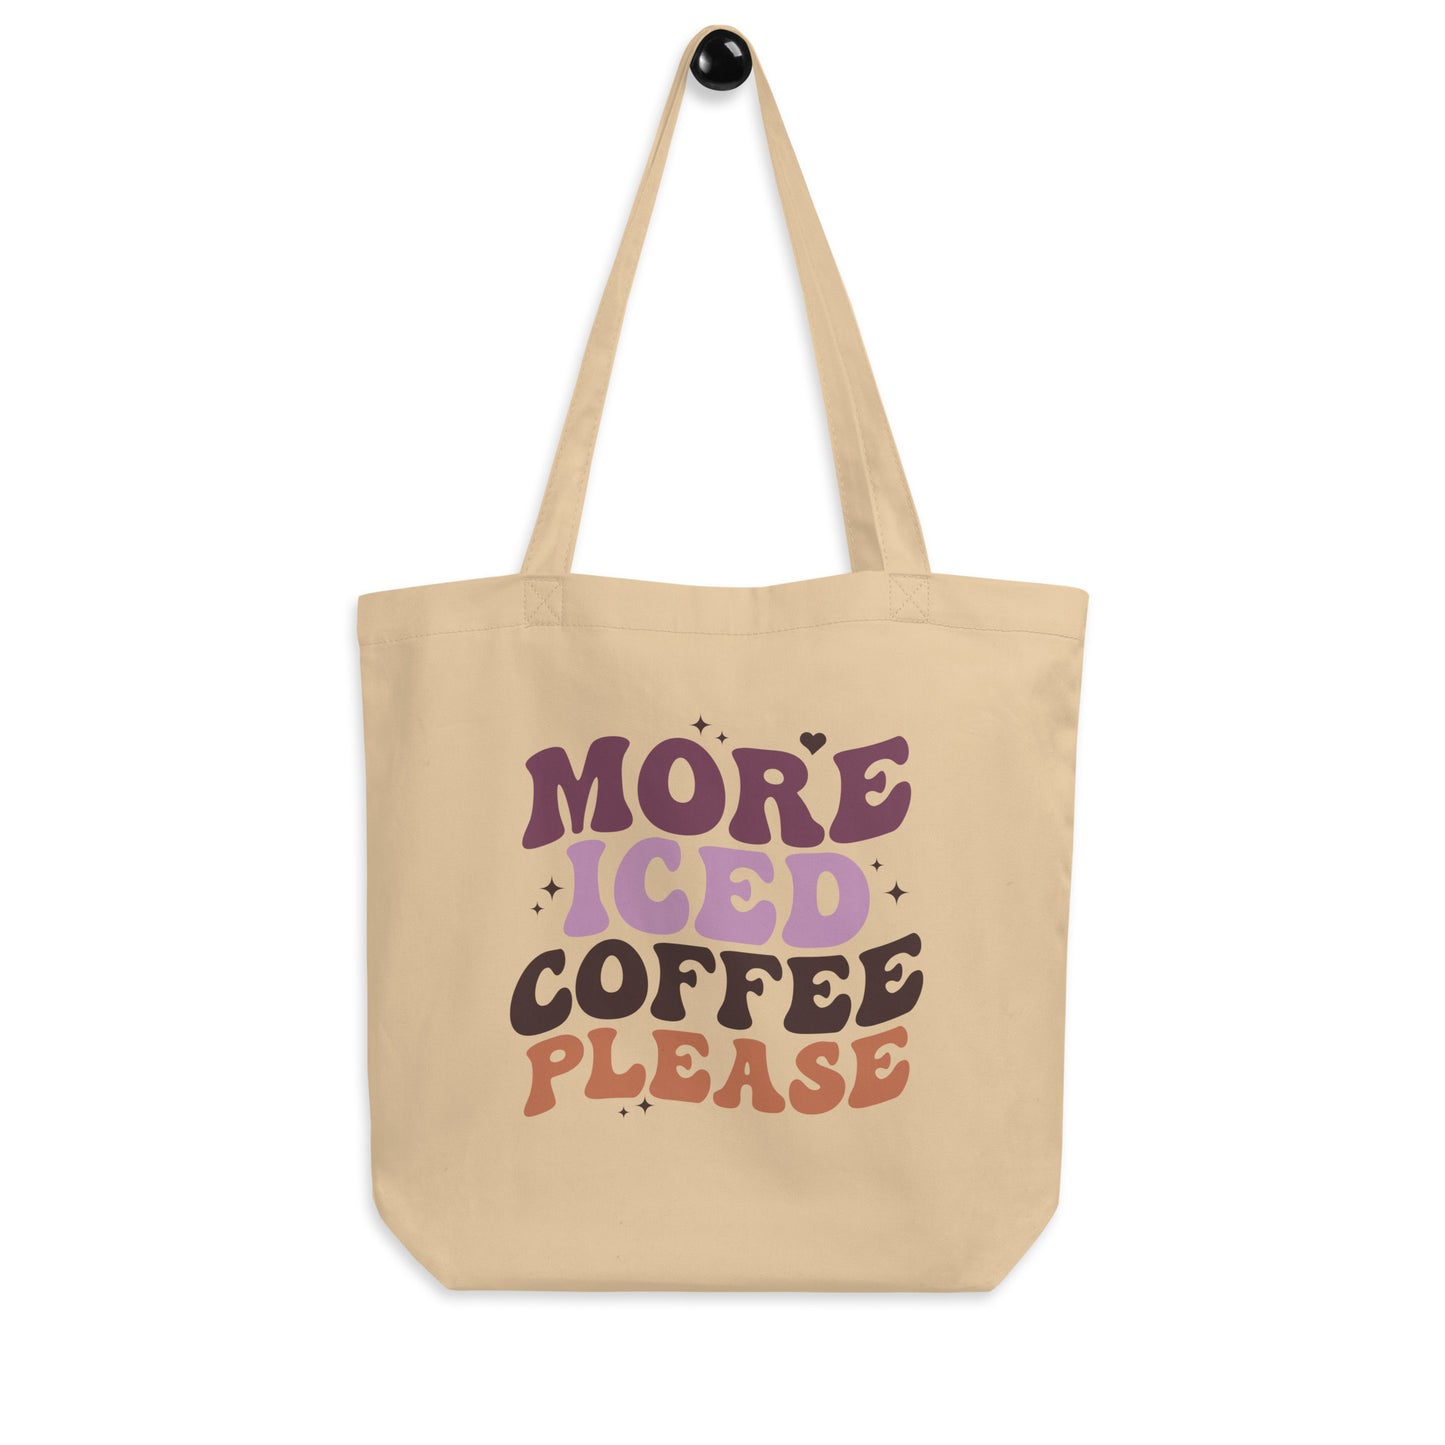 More Iced Coffee Please Tote Bag